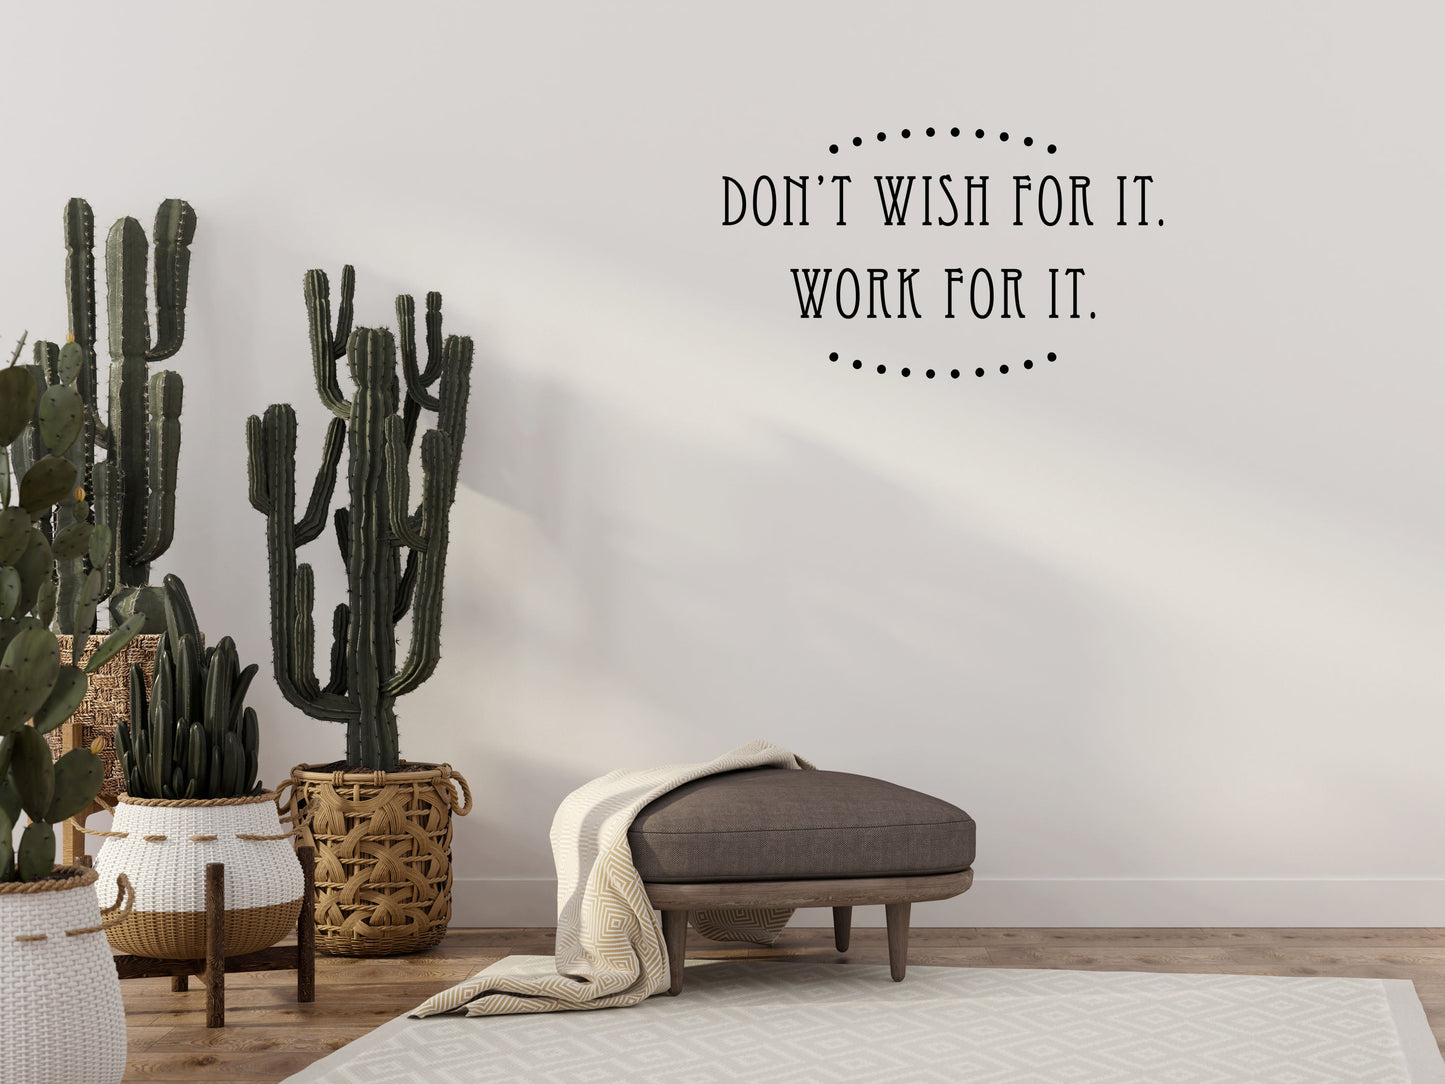 Don't Wish For It Work For It Motivational Sticker - Inspirational Wall Decals Vinyl Wall Decal Inspirational Wall Signs 